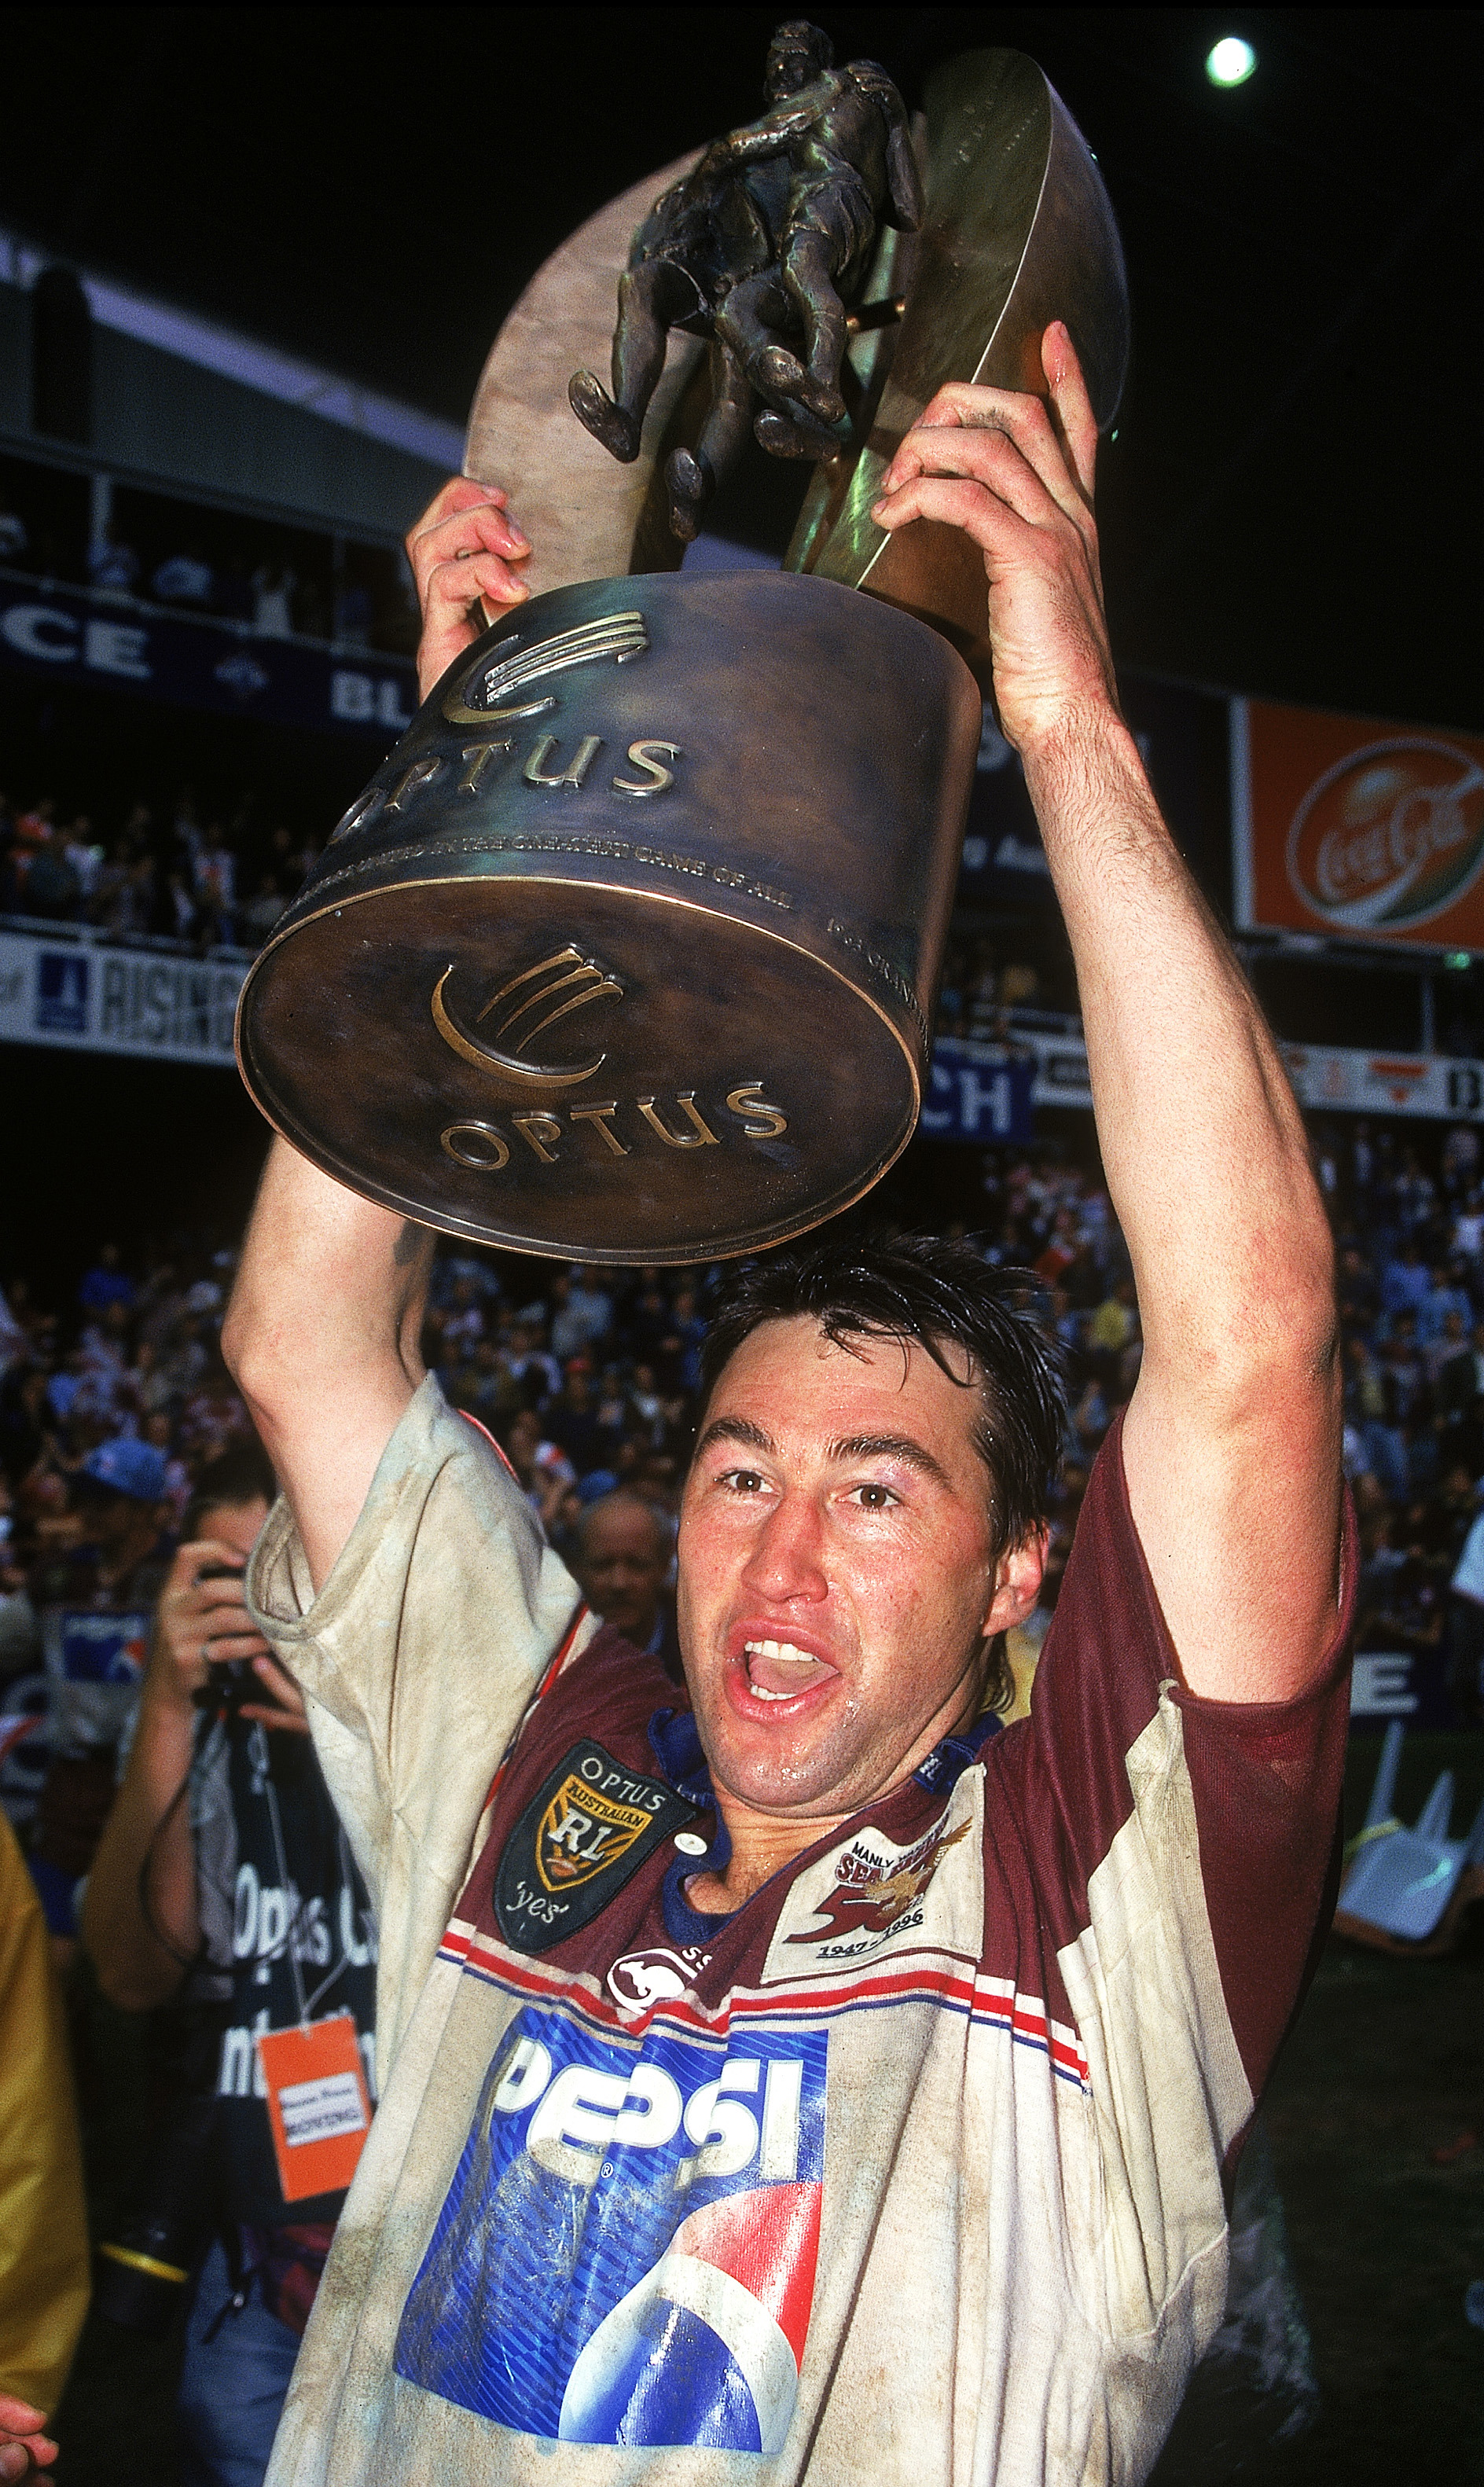 SYDNEY, AUSTRALIA - SEPTEMBER 29:  Terry Hill of the Sea Eagles holds aloft the winners trophy after the ARL Grand Final between the Manly Warringah Sea Eagles and the St George Dragons at the Sydney Football Stadium September 29, 1996 in Sydney, Australia. (Photo by Getty Images)